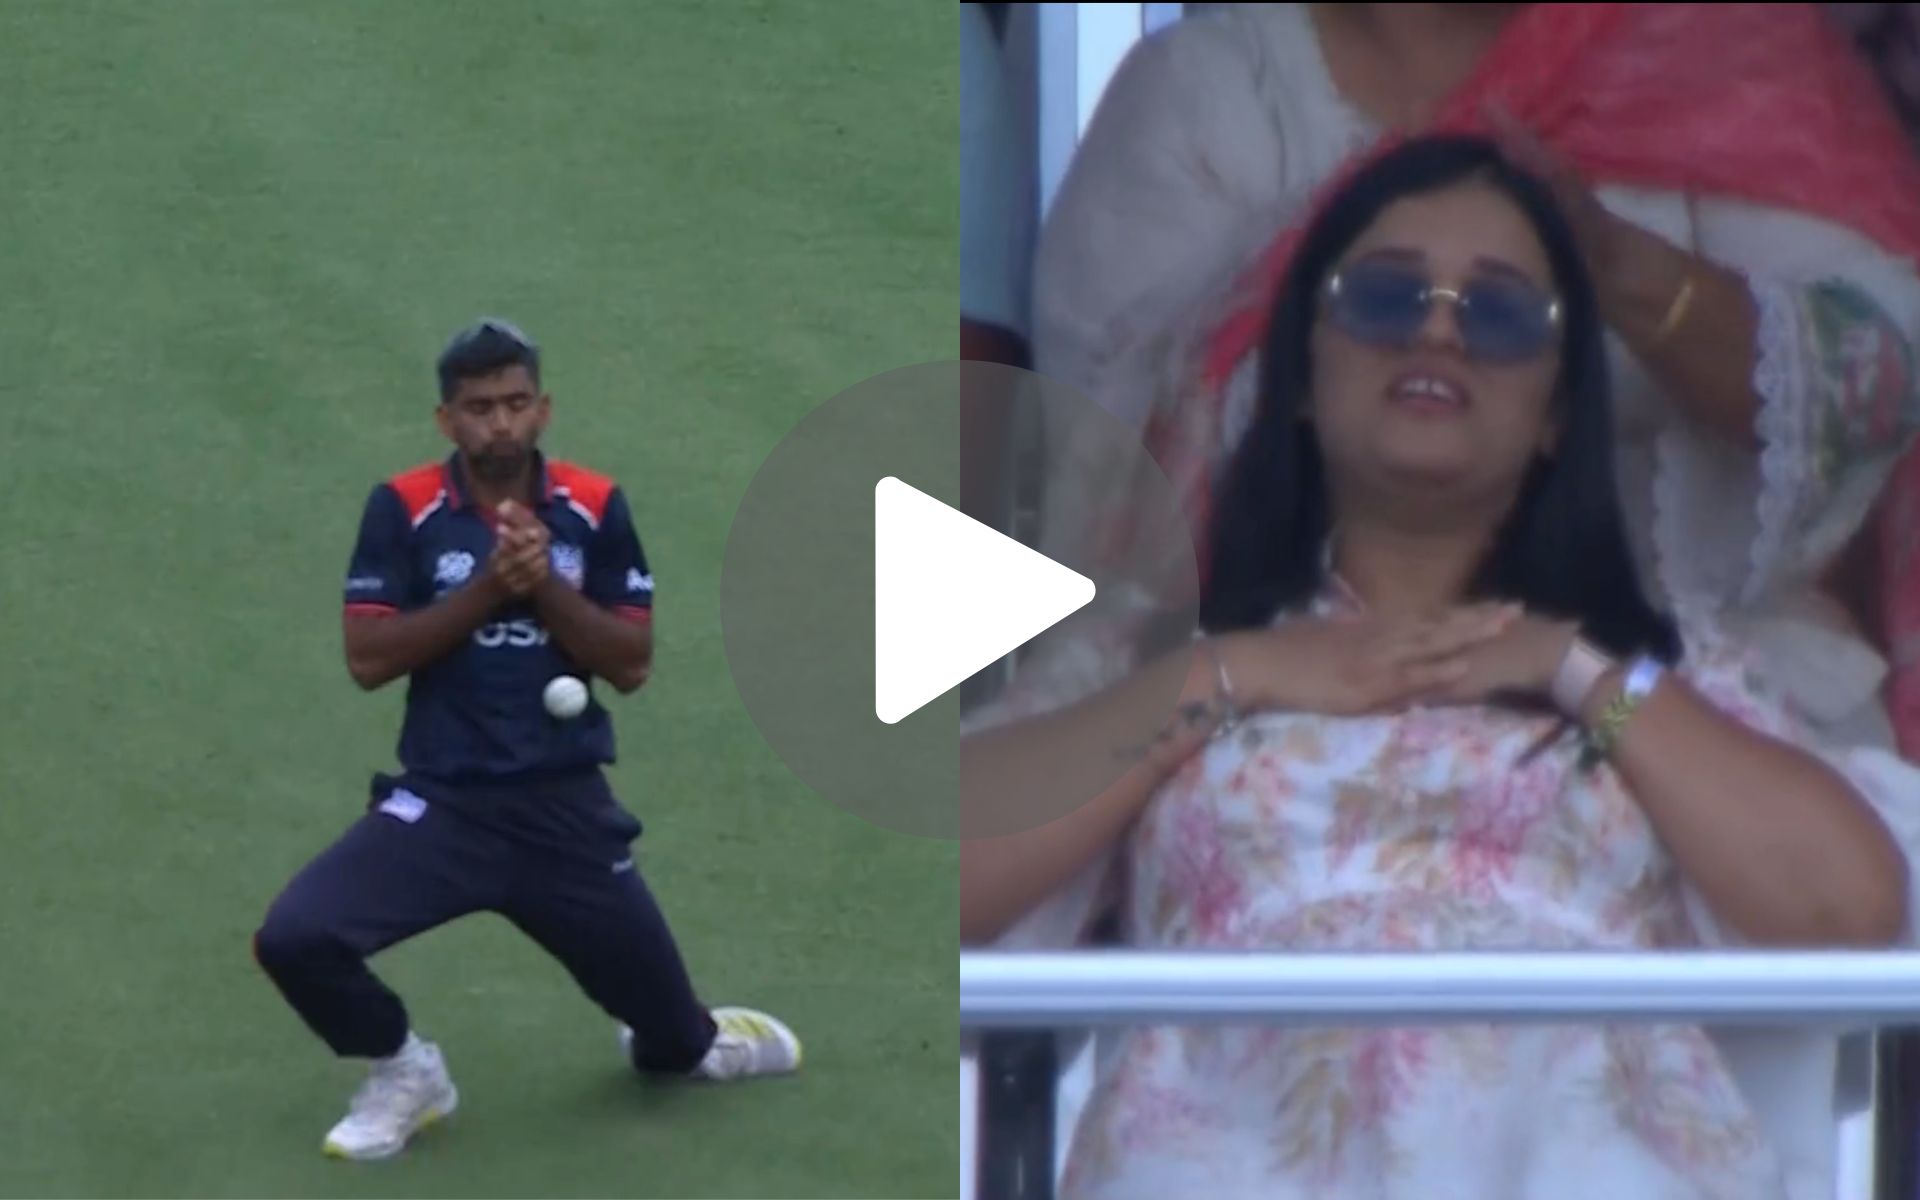 [Watch] SKY's Wife 'Relieved' After Netravalkar's Regulation Catch Drop In IND Vs USA